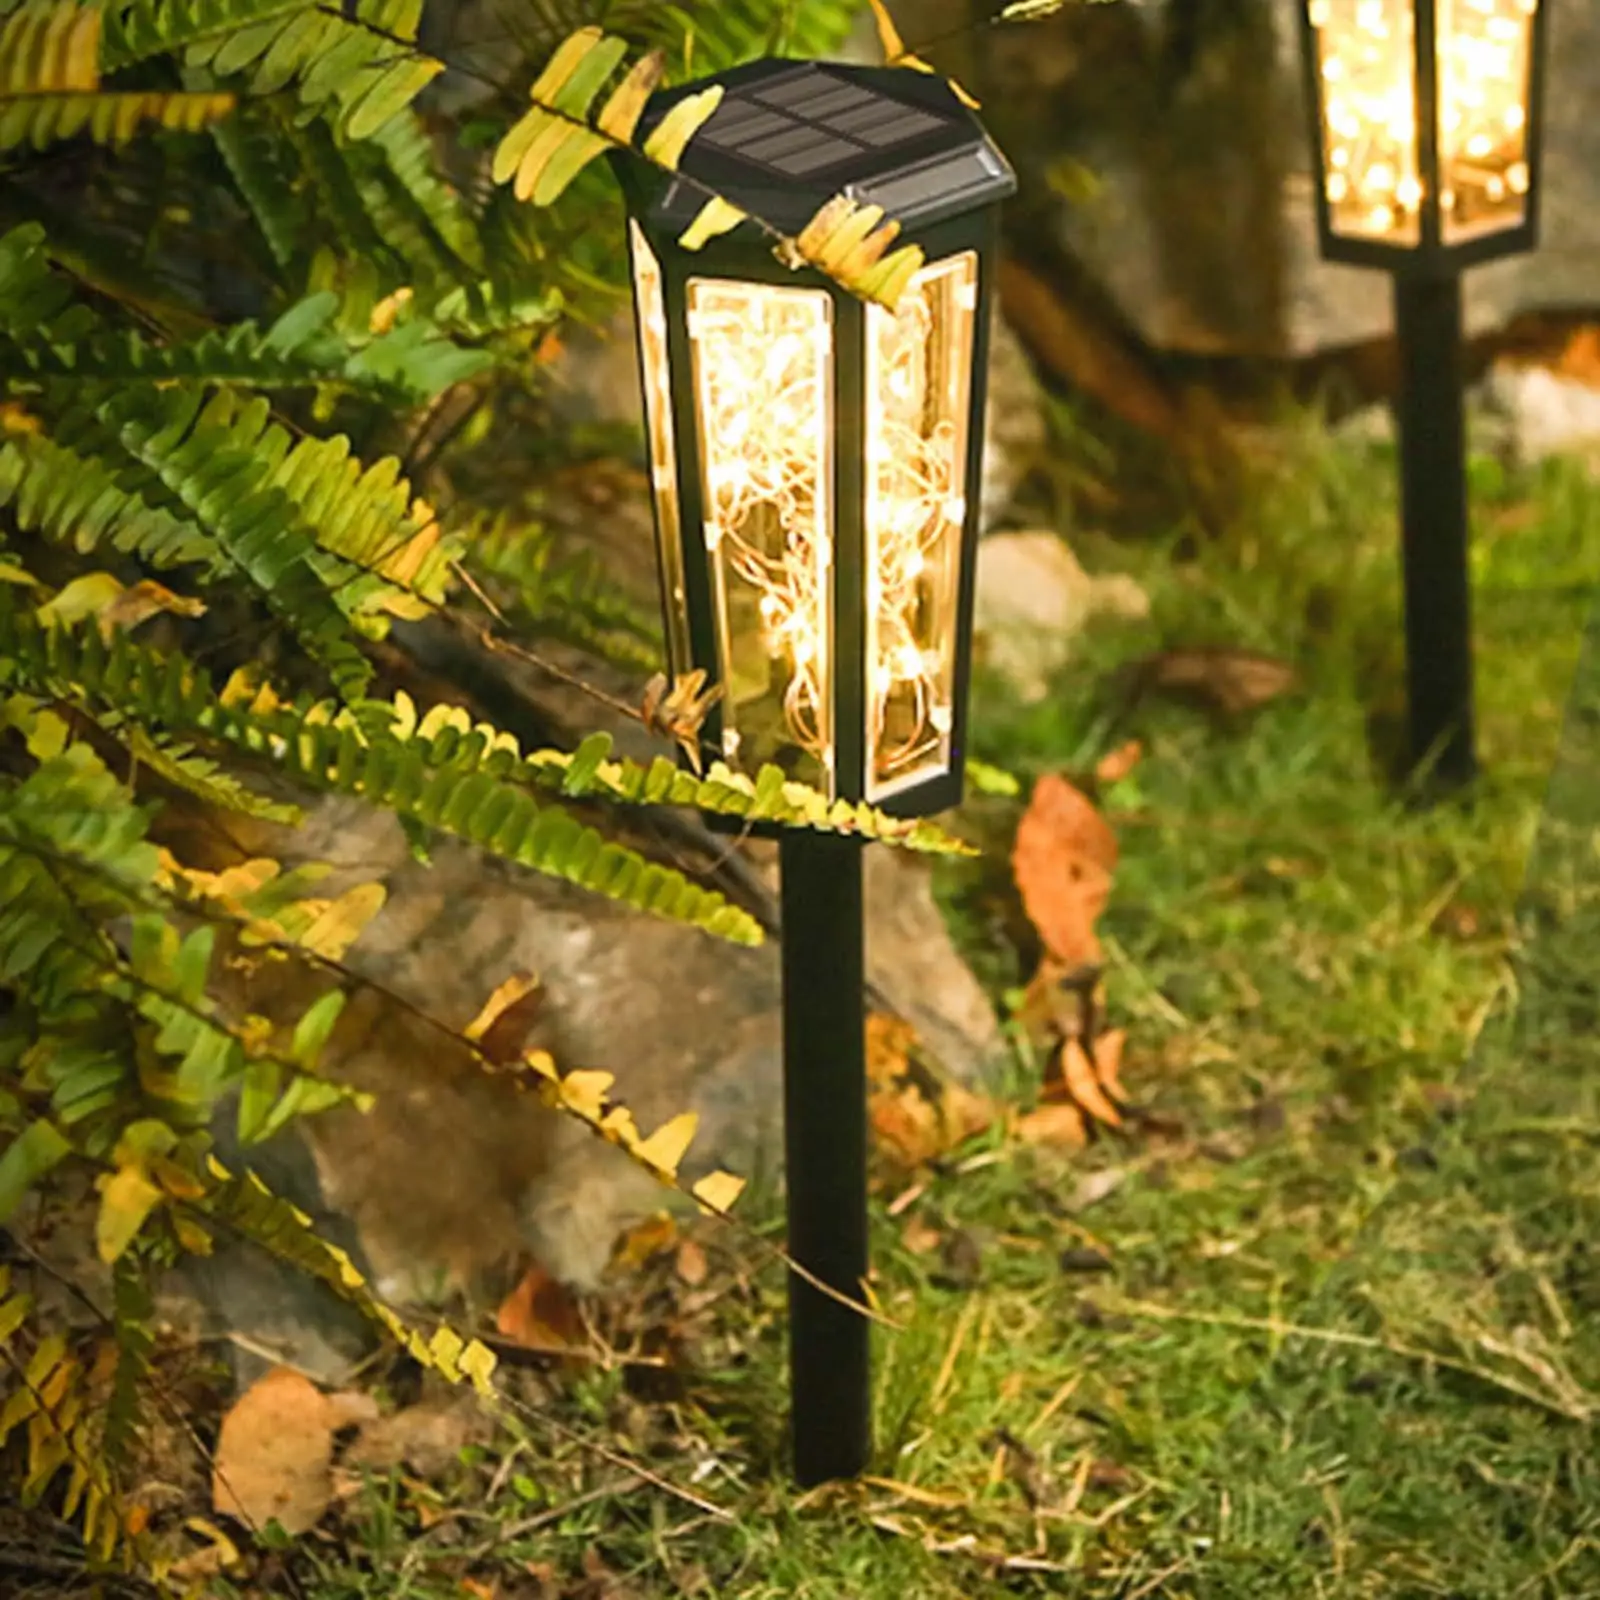 Solar Garden Stakes Lights LED Landscape Lighting Decorative Outdoor Pathway Light for Lawn Outside Ground Decor Patio Party